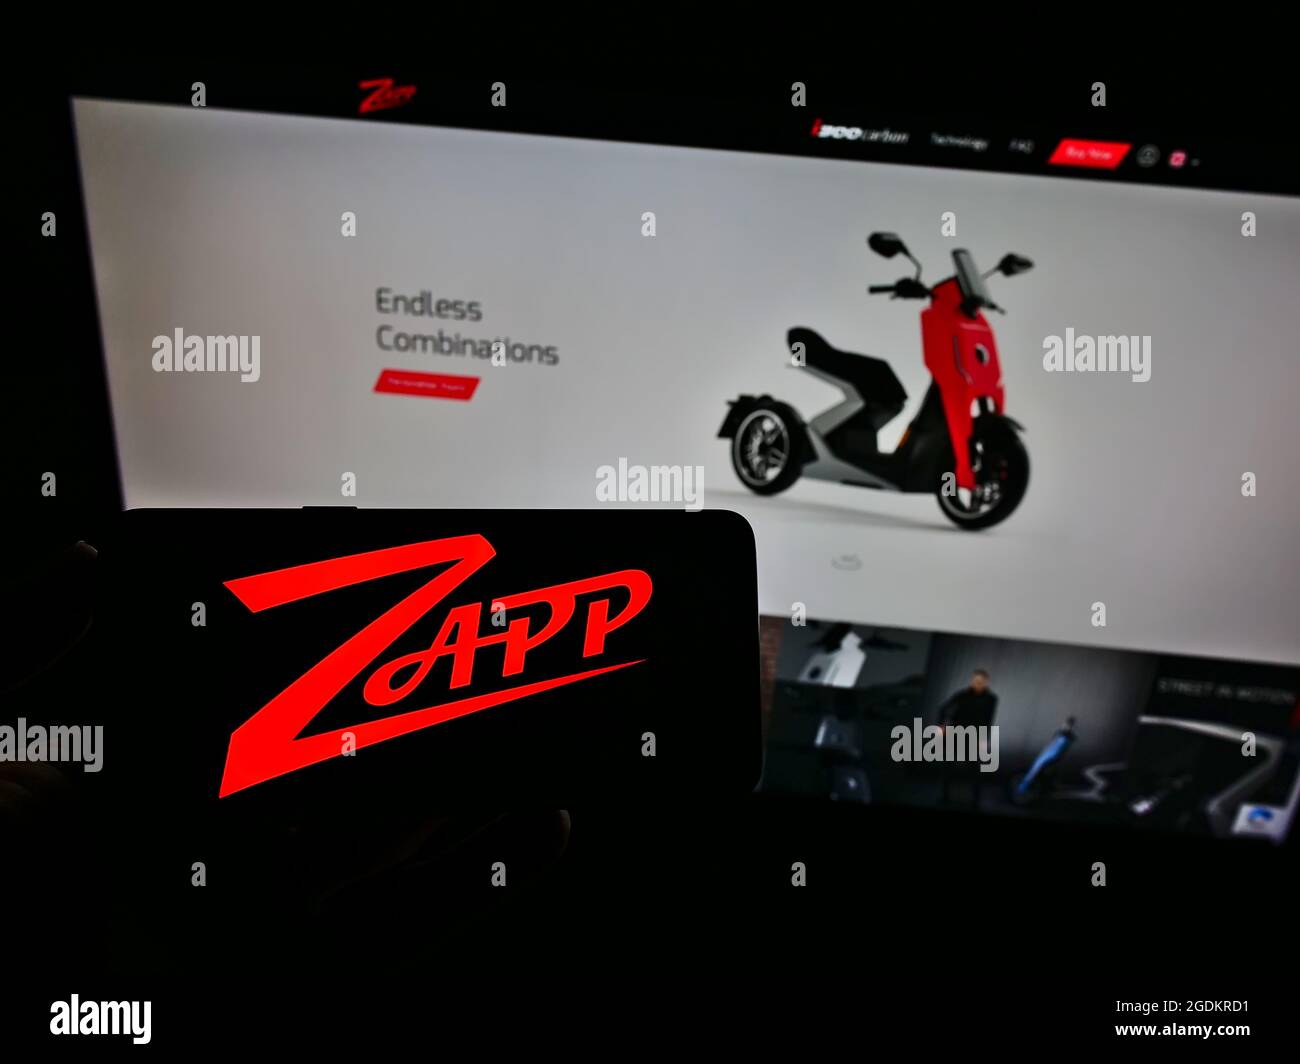 Person holding smartphone with logo of electric motorcycle company Zapp Scooters Ltd. on screen in front of website. Focus on phone display. Stock Photo